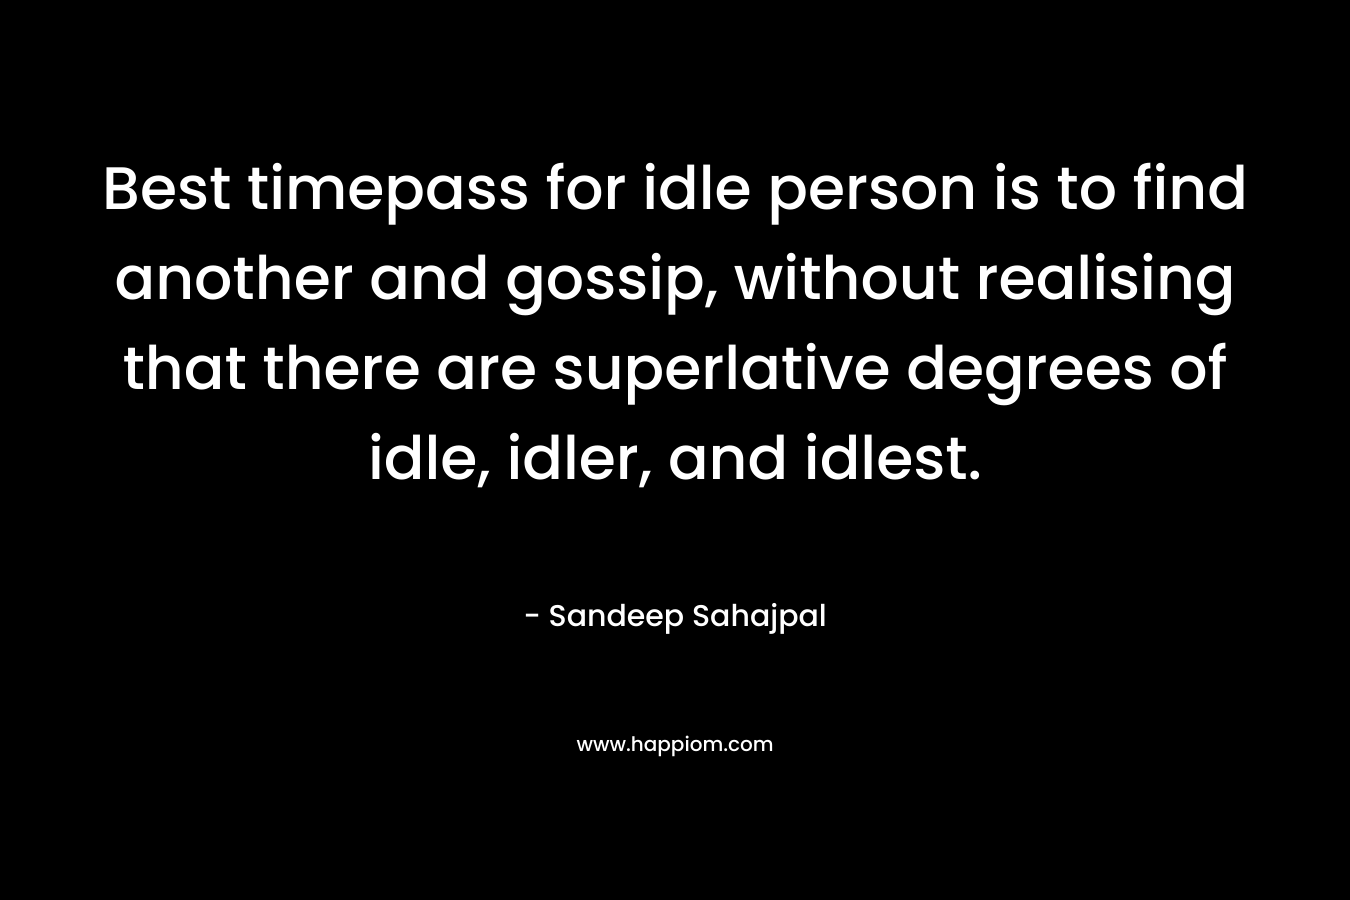 Best timepass for idle person is to find another and gossip, without realising that there are superlative degrees of idle, idler, and idlest. – Sandeep Sahajpal